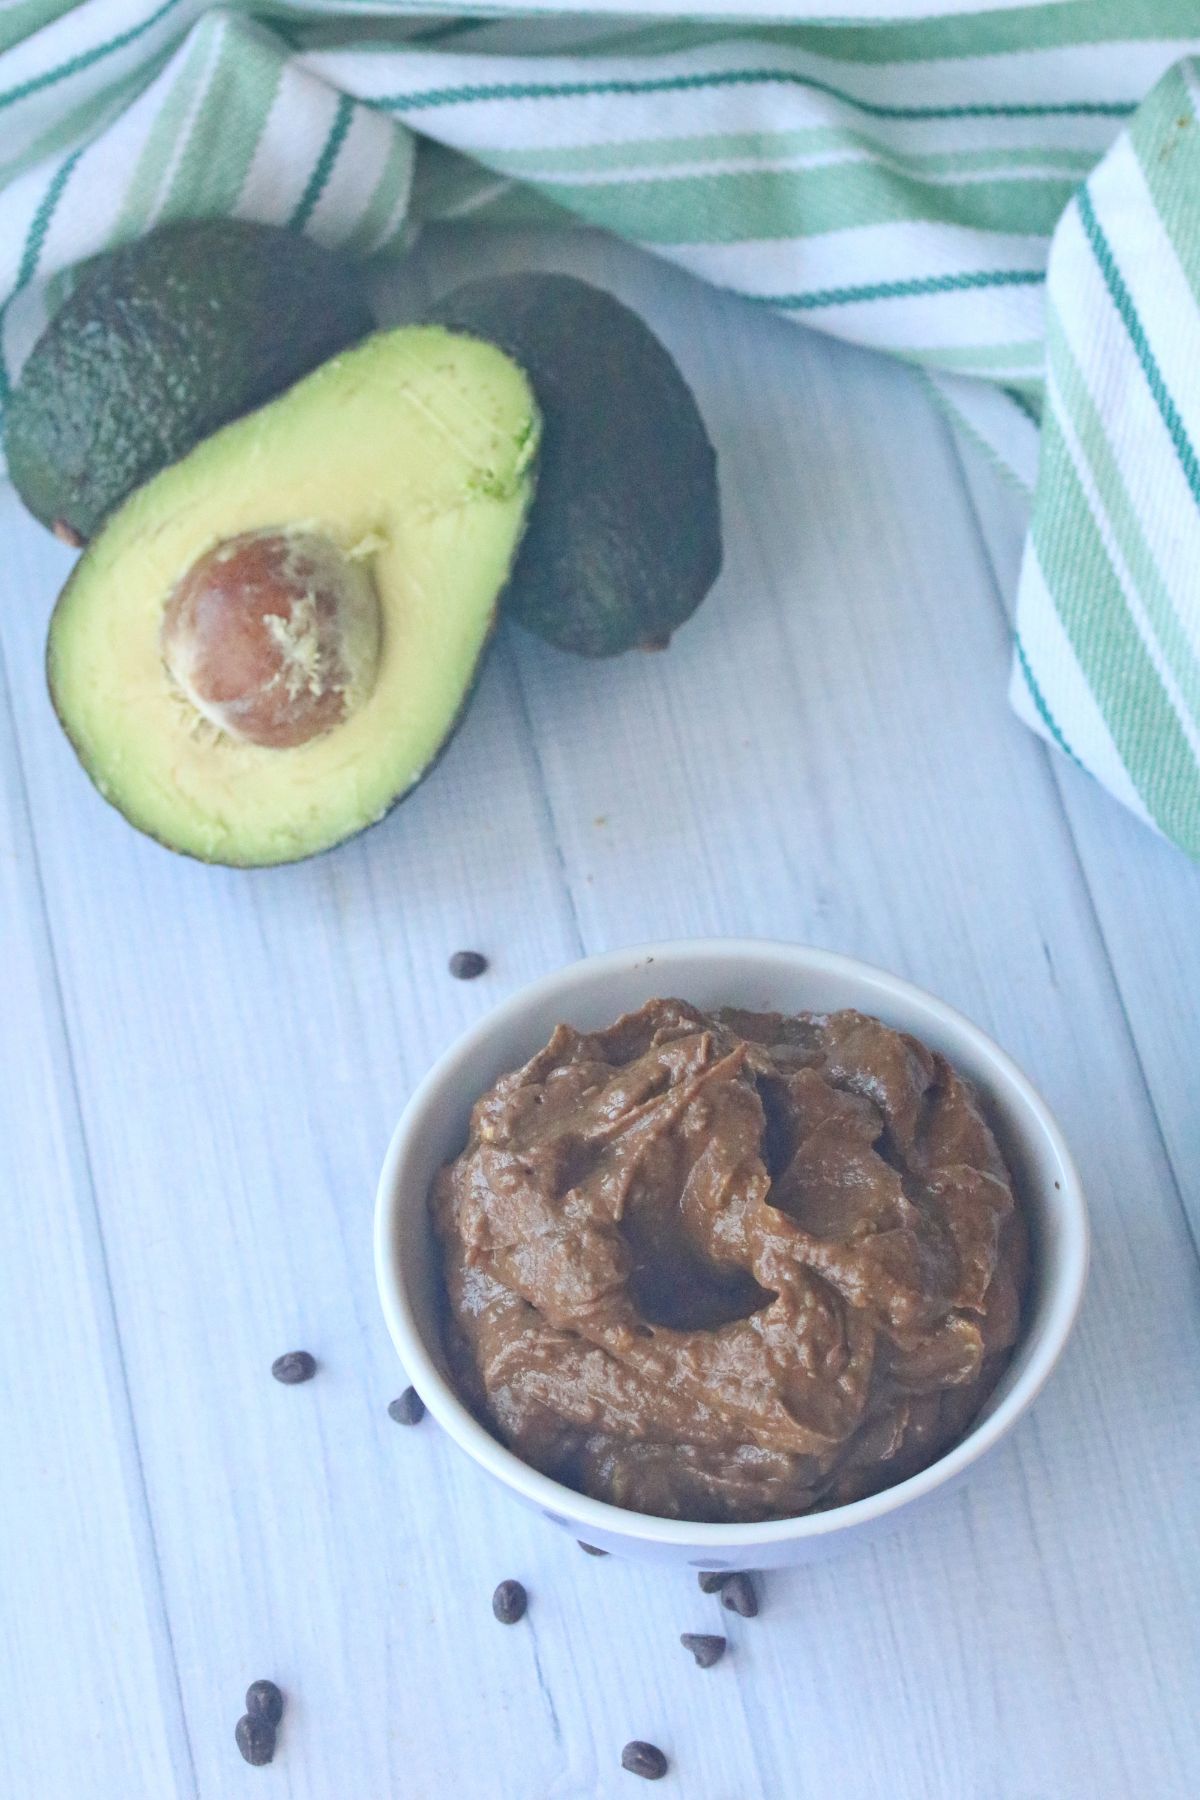 Vertical image of Chocolate Avocado Mousse in a white serving bowl at the lower right part of the image and fresh avocados at the upper left part of the image.